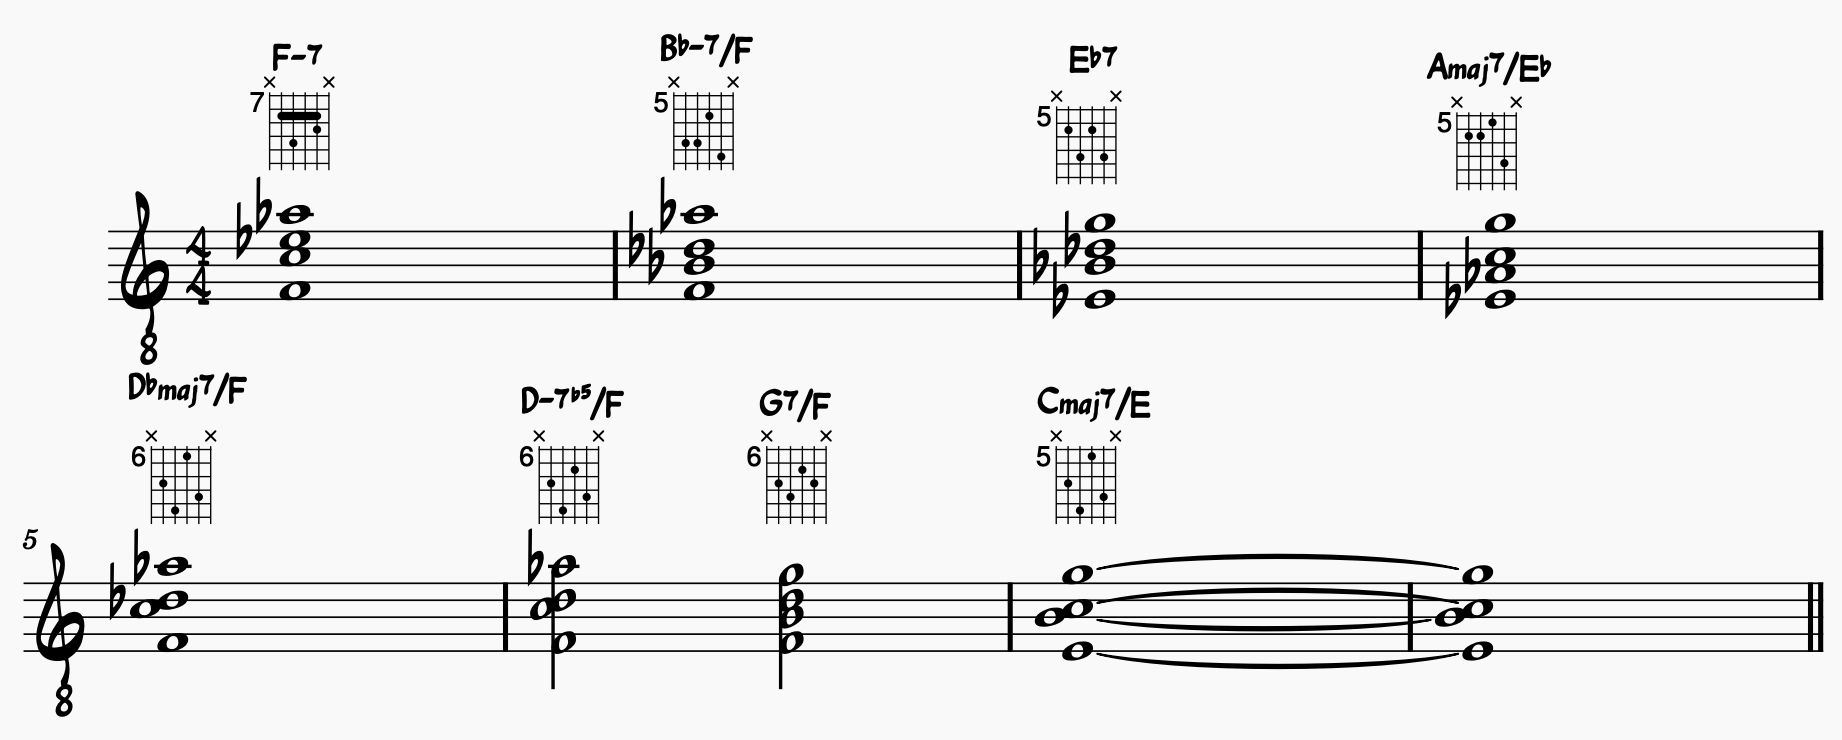 Jazz Guitar: Using chord inversions over All the Things You Are.